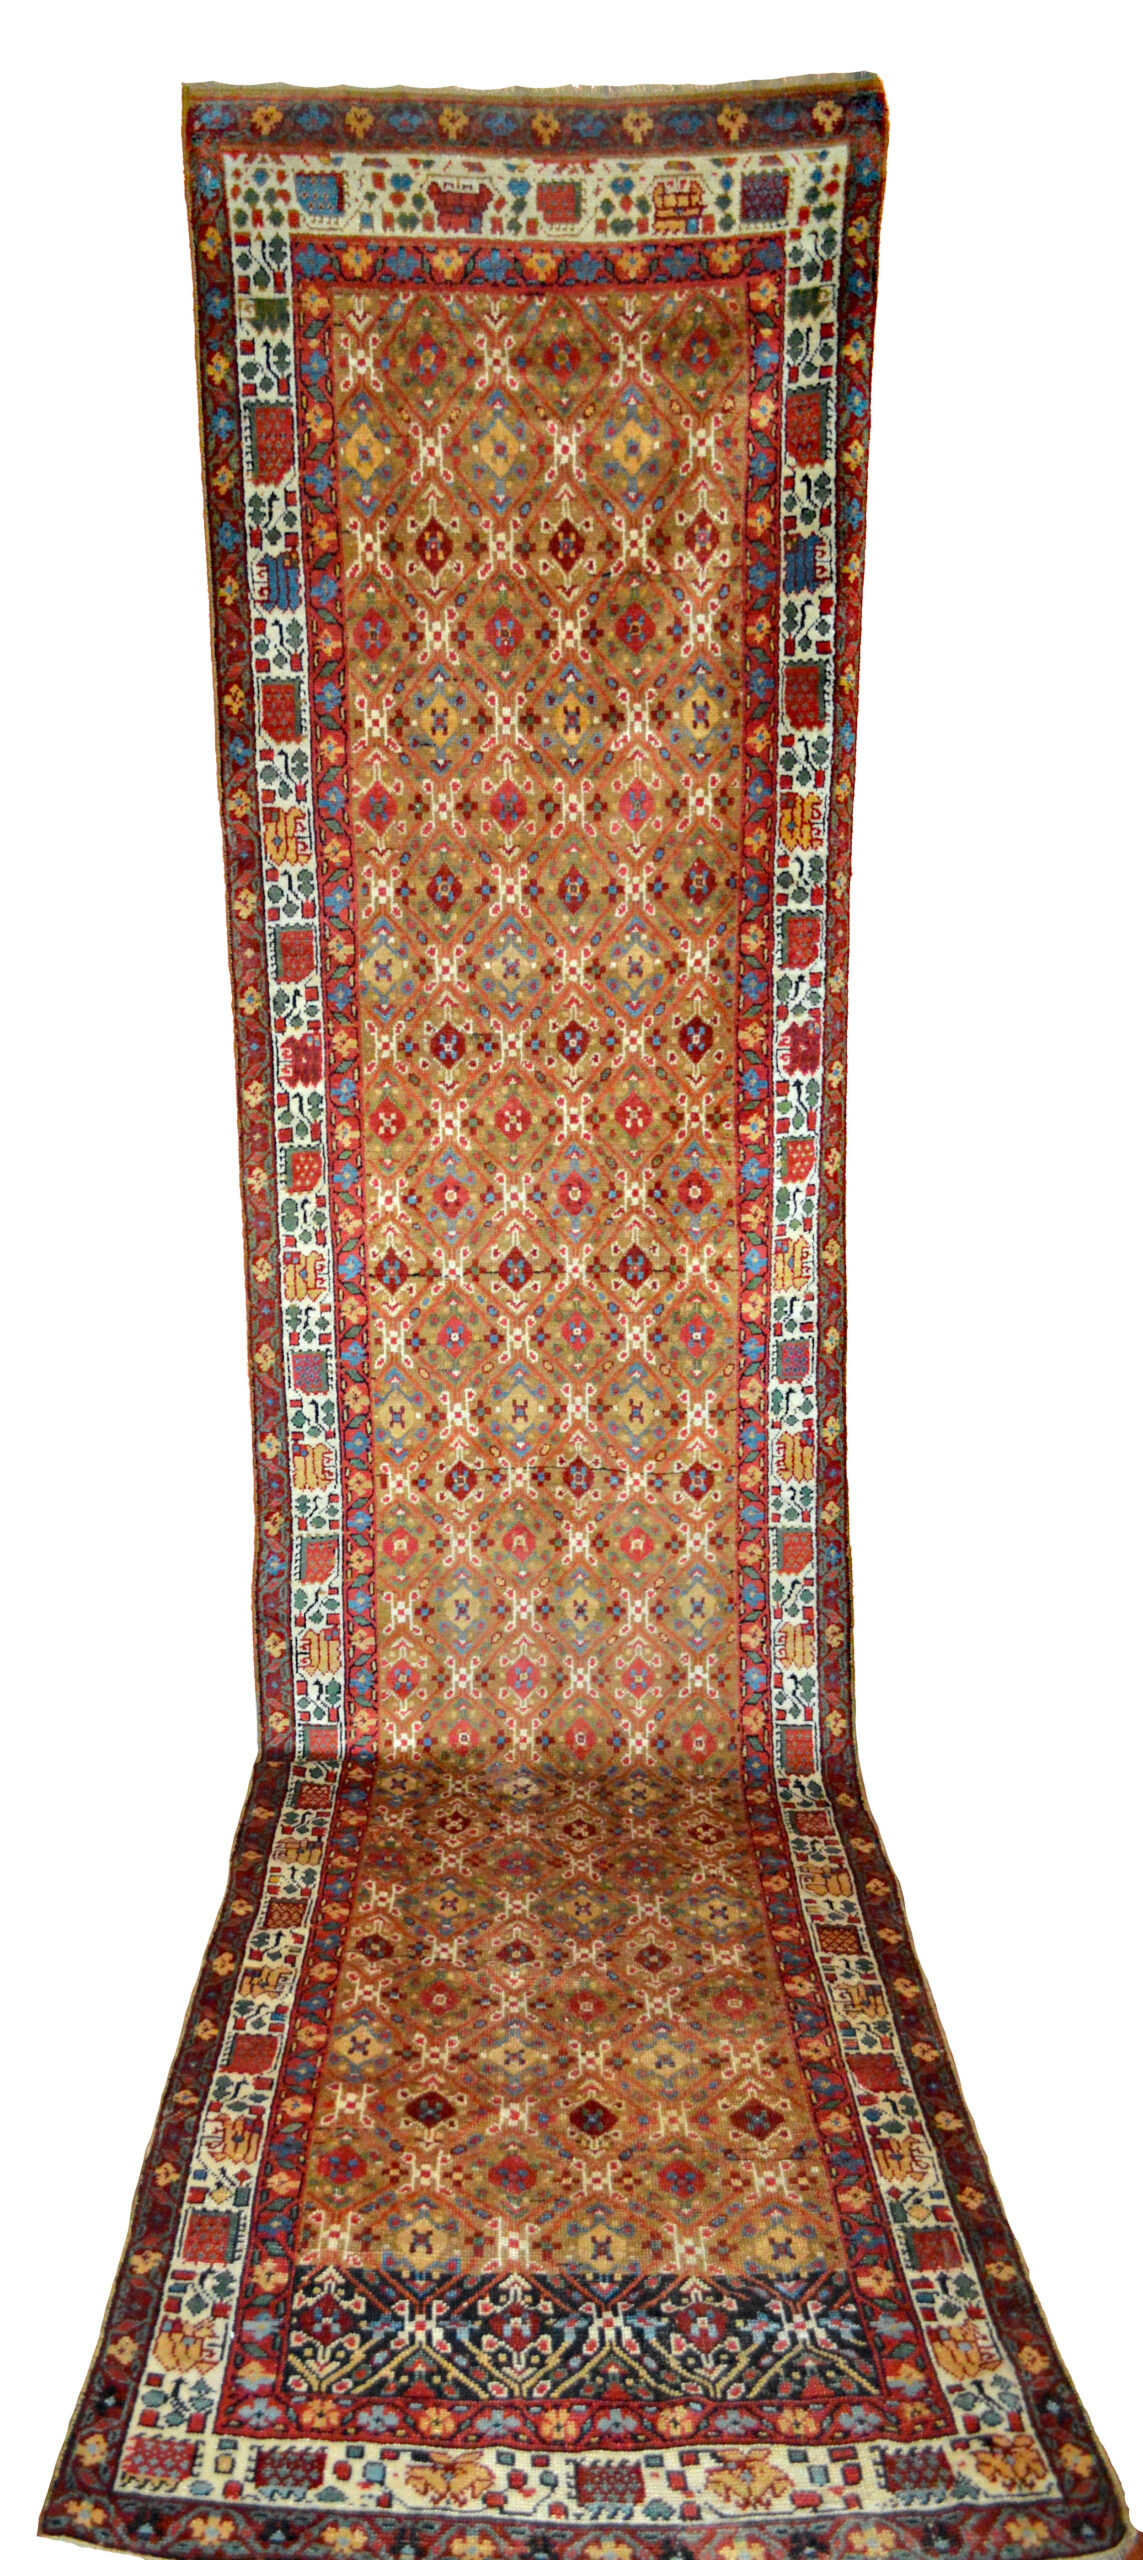 Antique northwest Persian runner with a camel color field framed by an ivory border